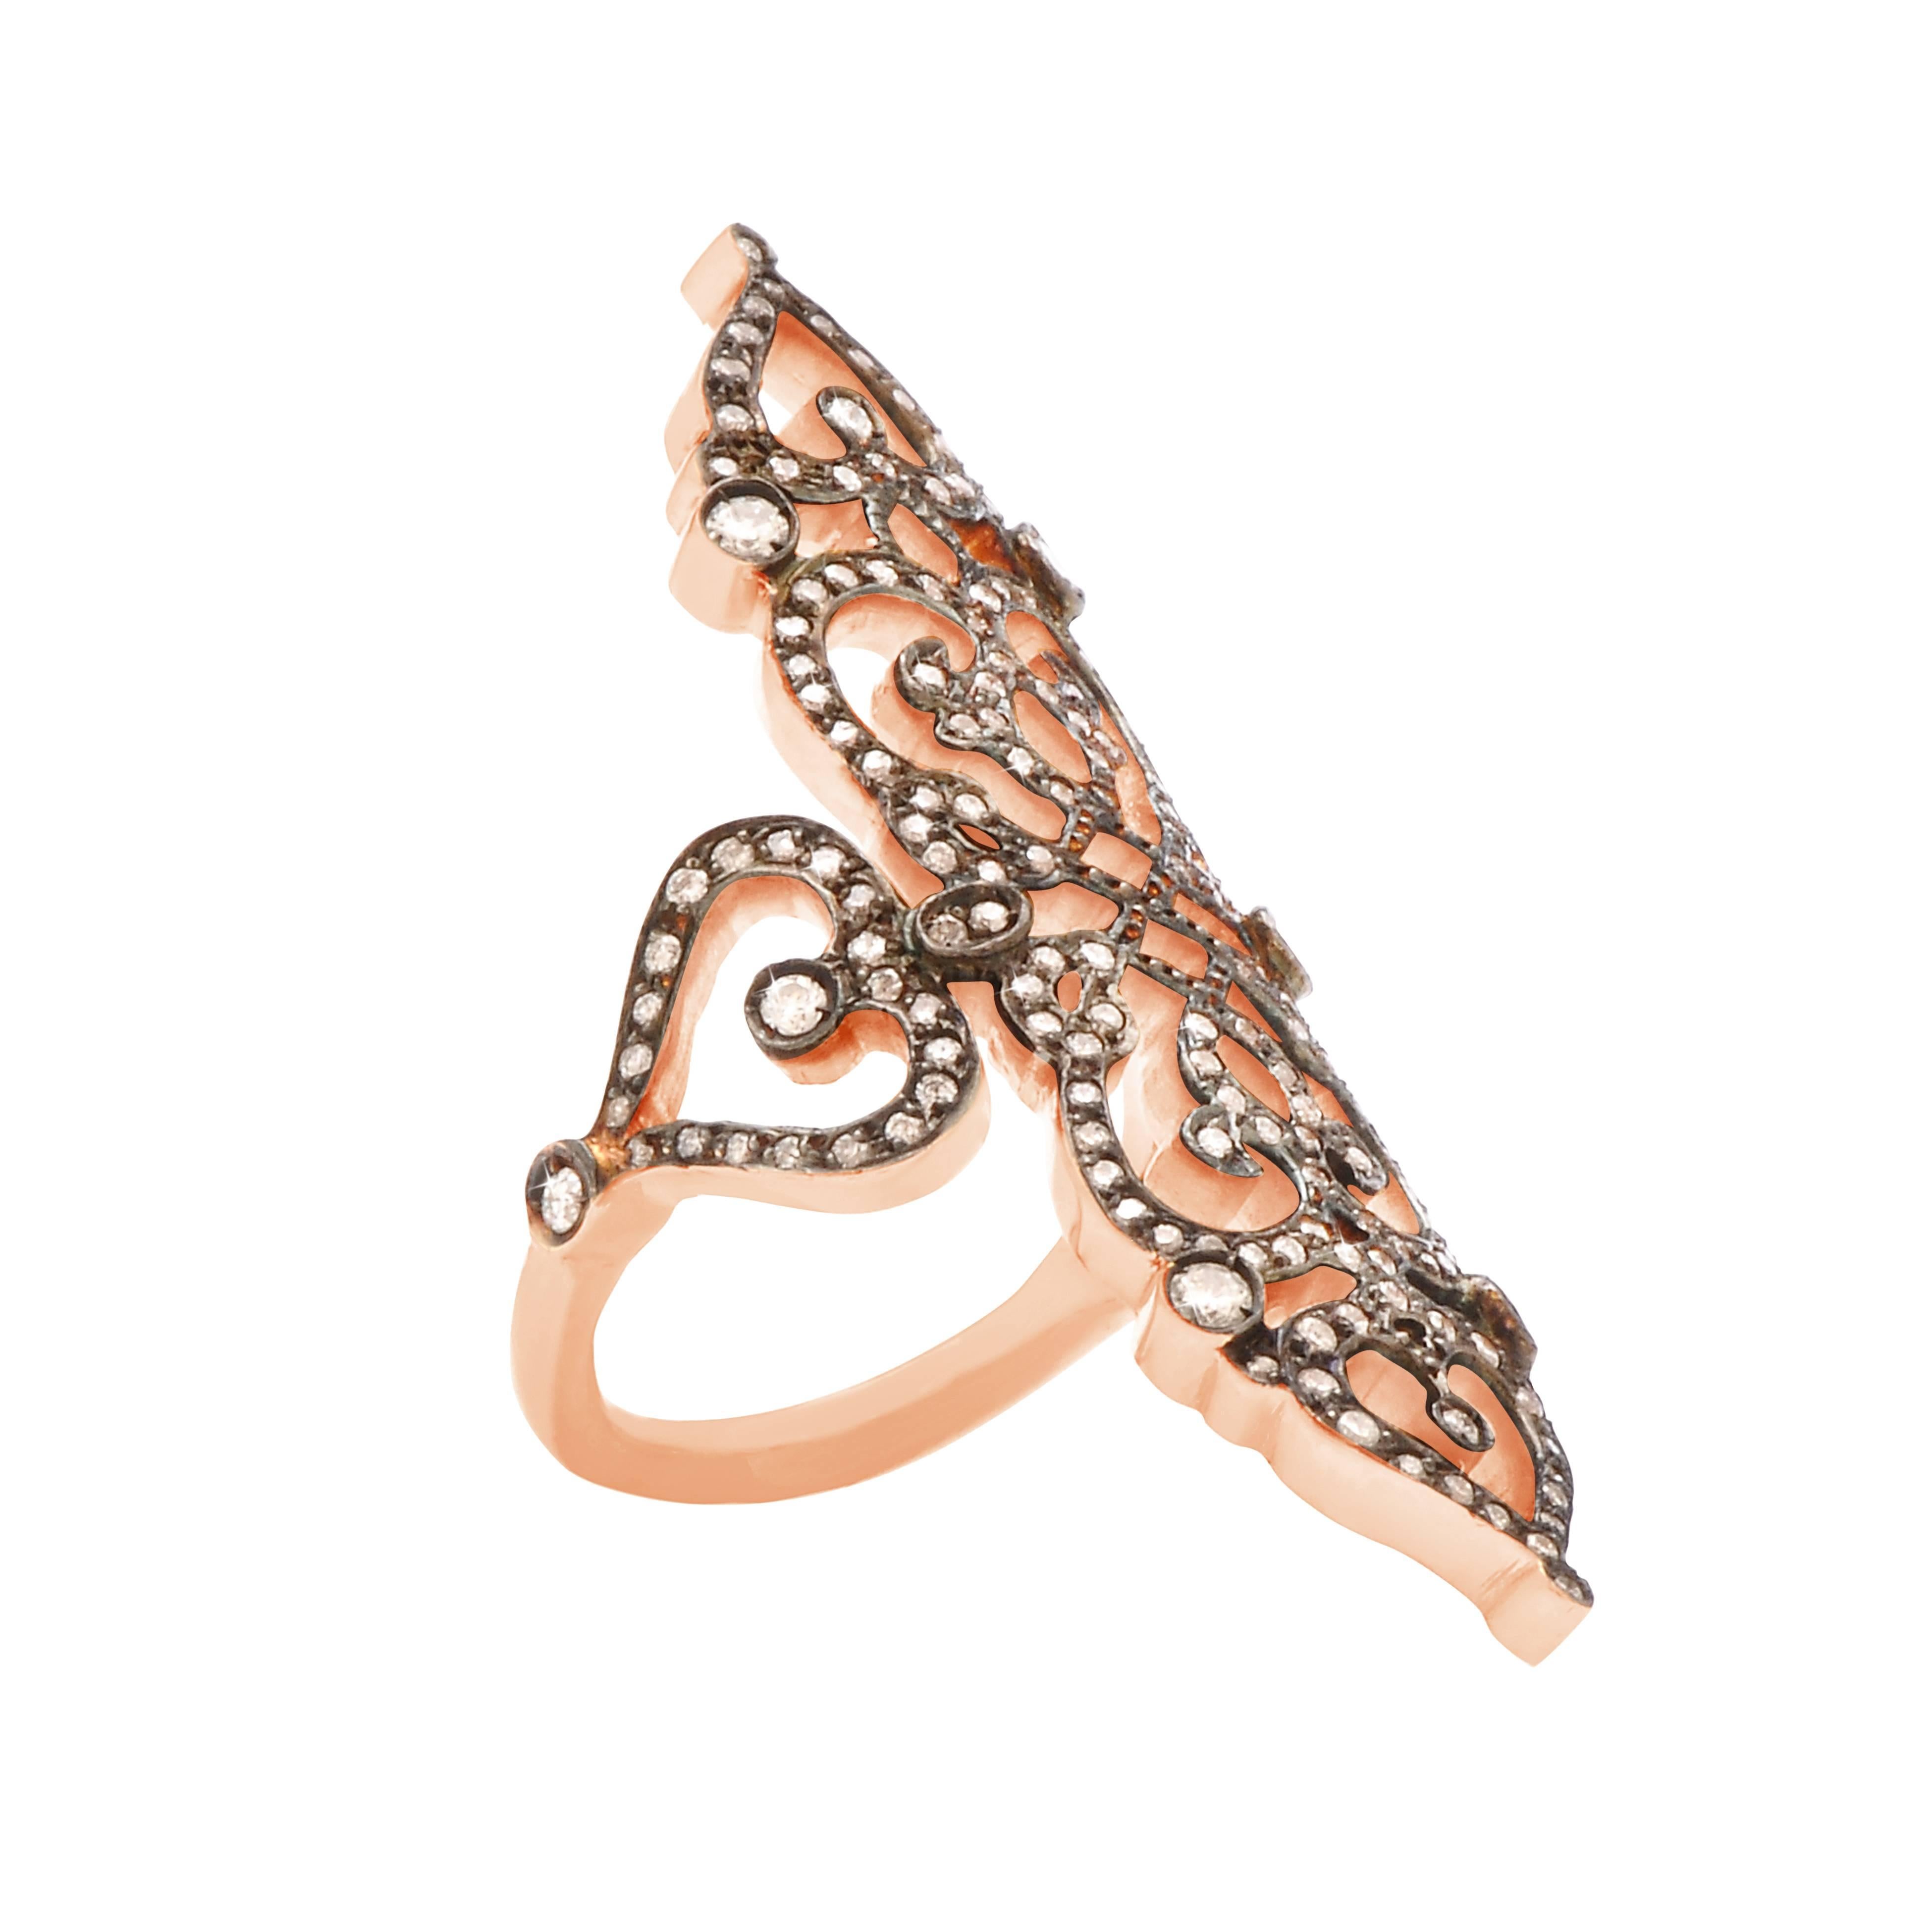 Sabine Getty ‘Cross’ ring in 18k rose gold set with diamonds

Diamond: 0.98

 Available in a size 52.5

 Relic was the debut collection by Sabine Getty launched in September 2012. The collection received much international buzz with Rihanna